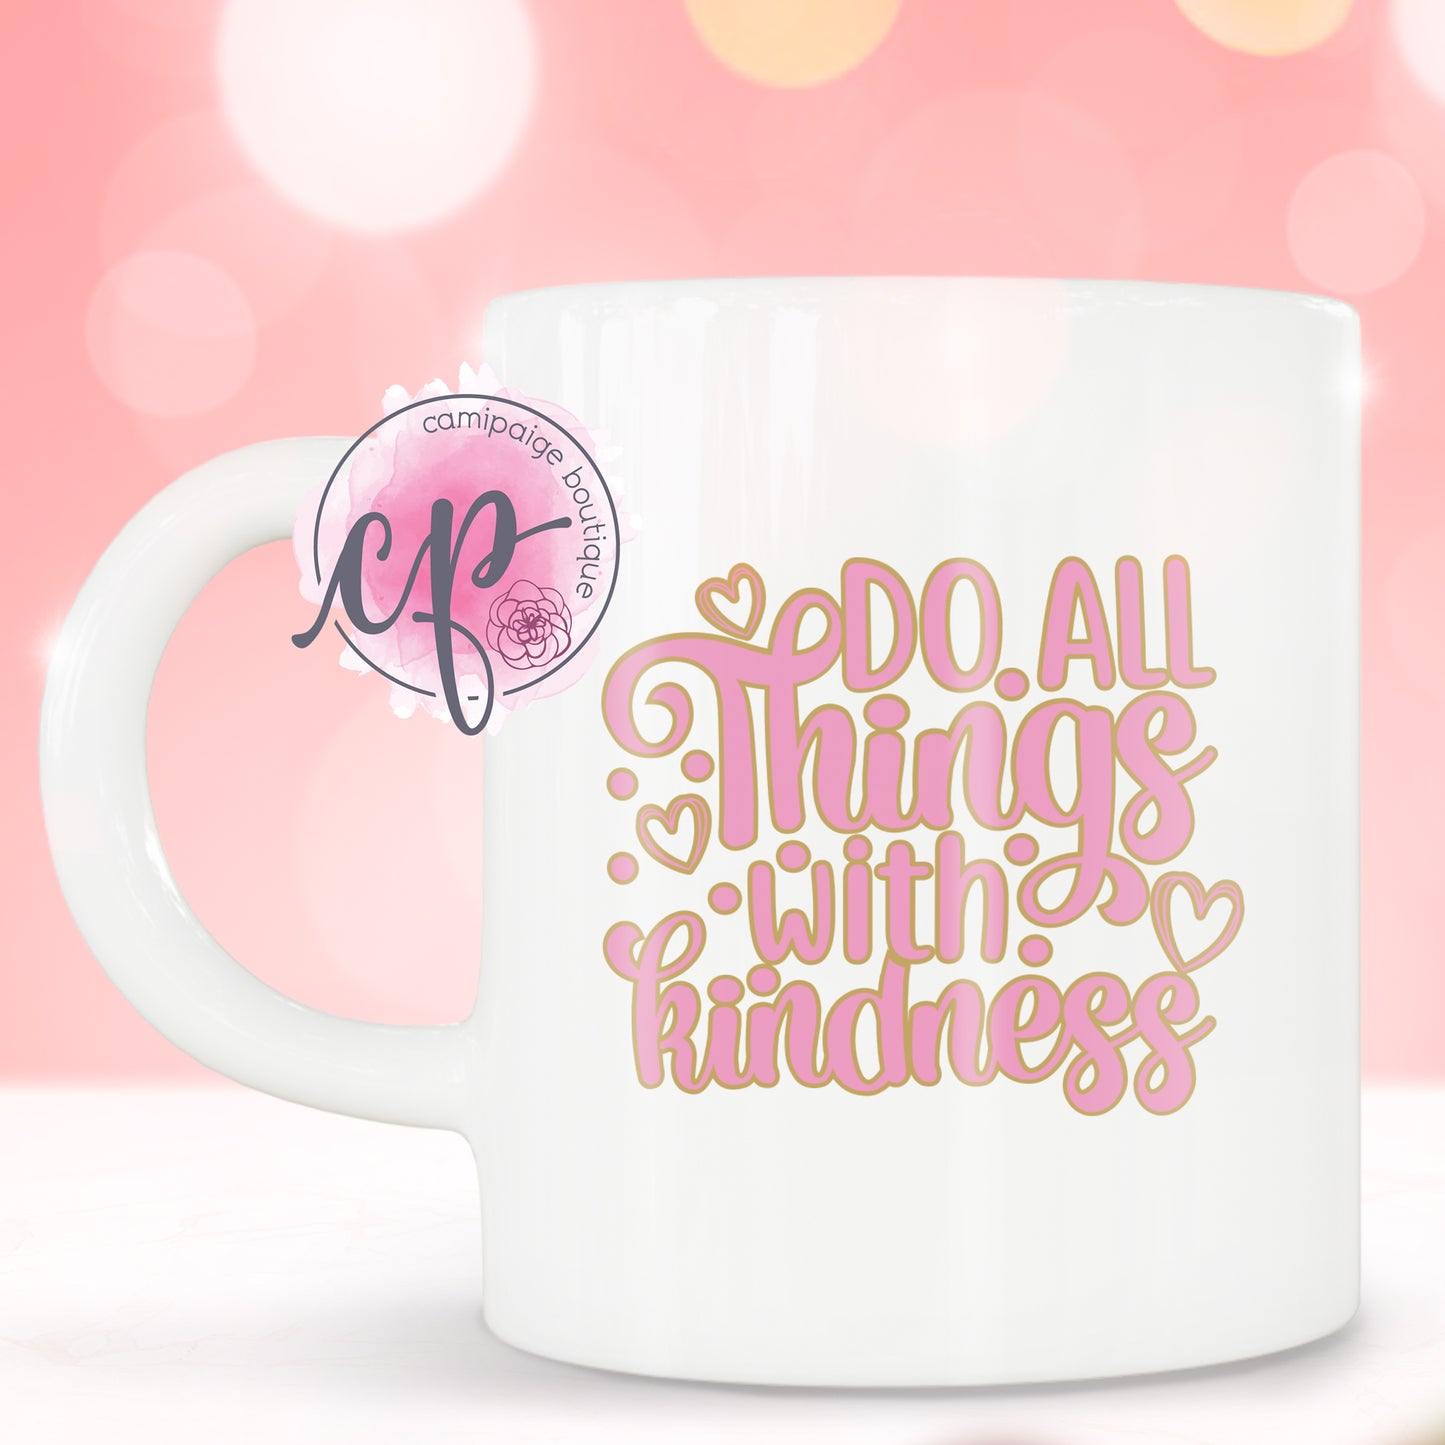 Do All Things With Kindness- Layered SVG File - DIGITAL DOWNLOAD ONLY